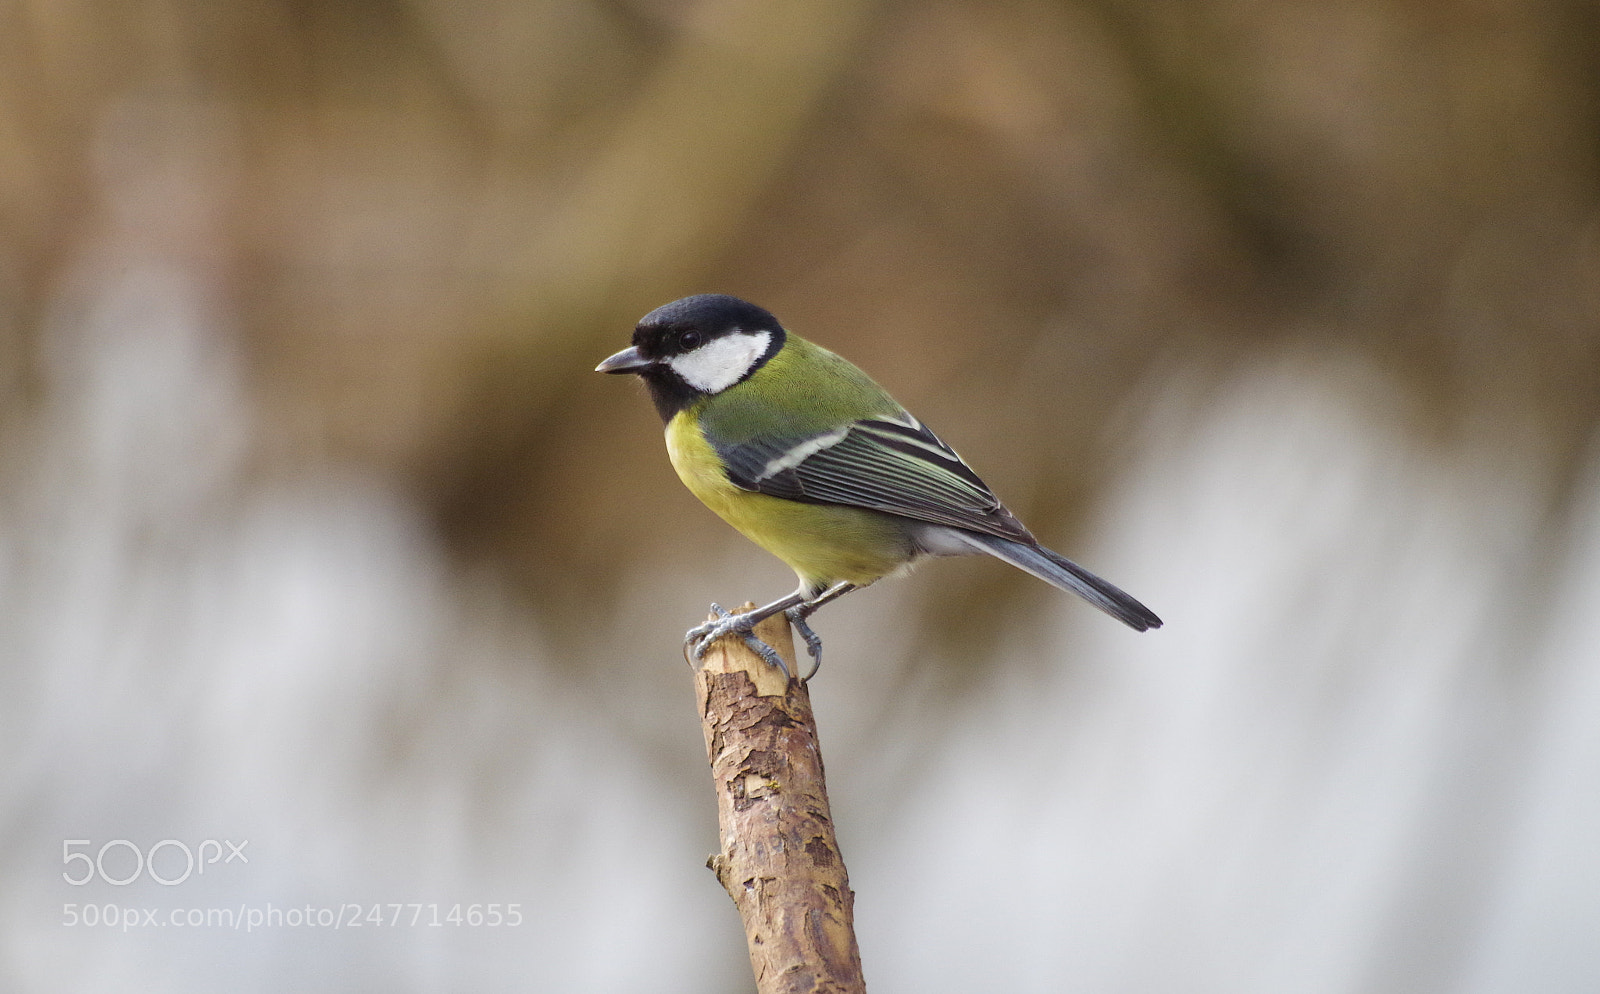 Pentax K-30 sample photo. Another great tit photography